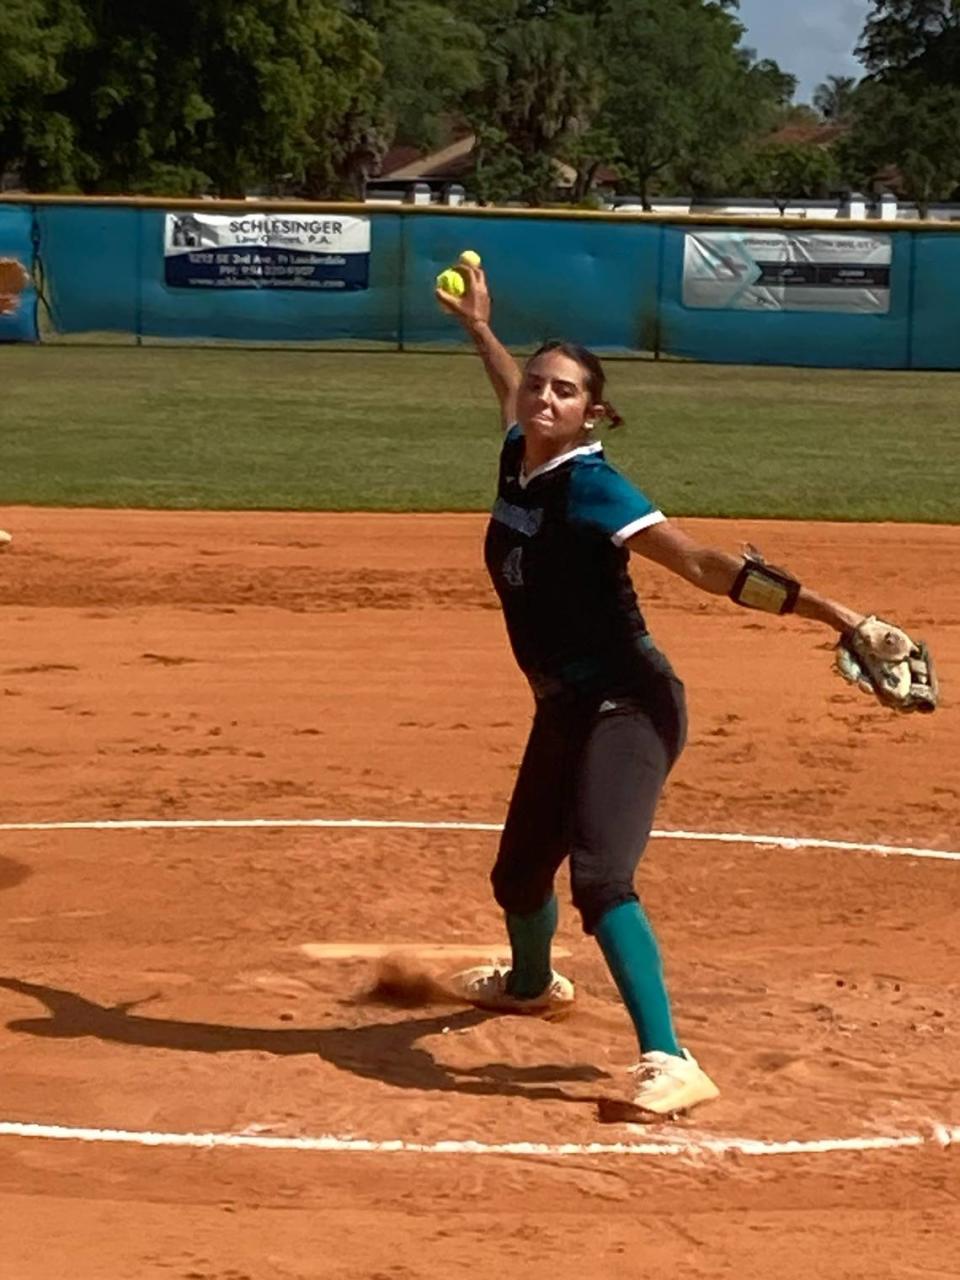 Coral Reef pitcher Aubrey Alonso allowed just one baserunner in four innings during her start Thursday. The Barracudas won 17-0 to secure the GMAC championship. Bill Daley/Special to the Miami Herald